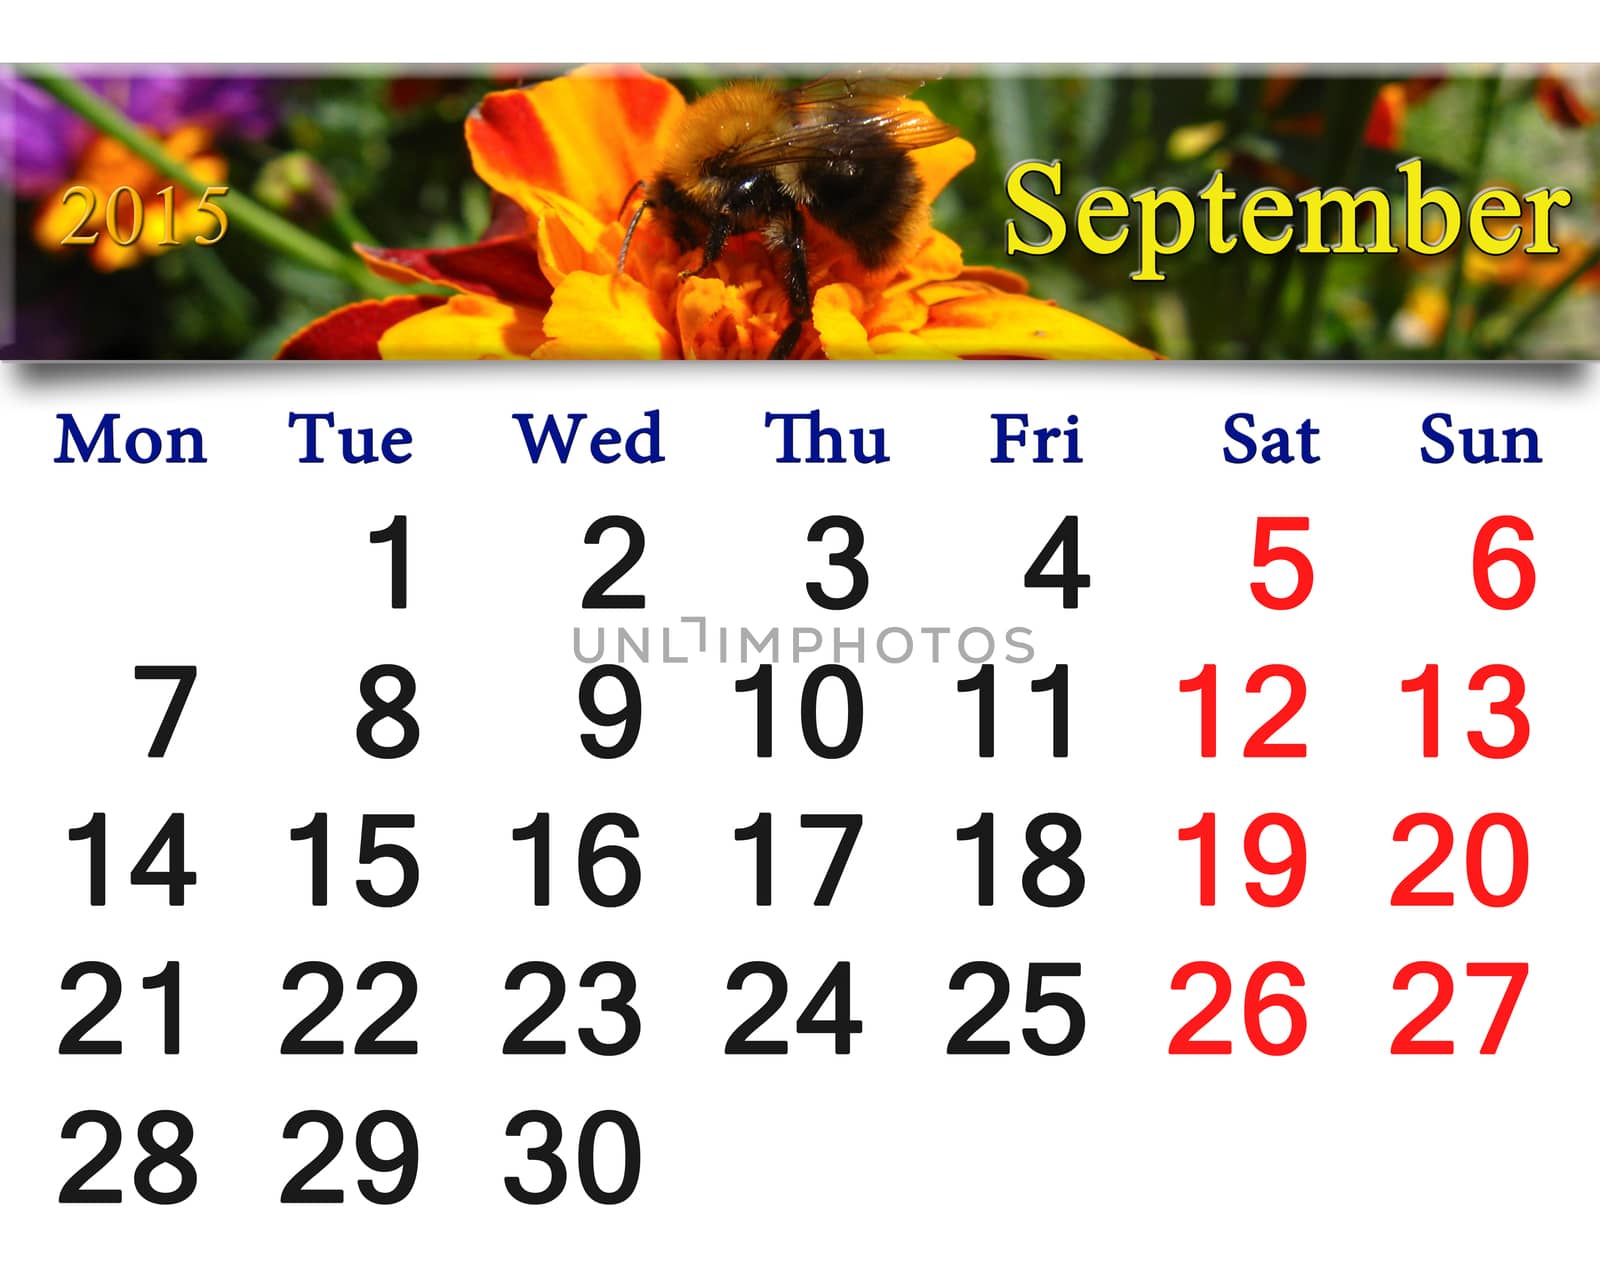 calendar for September of 2015 with bumblebee by alexmak